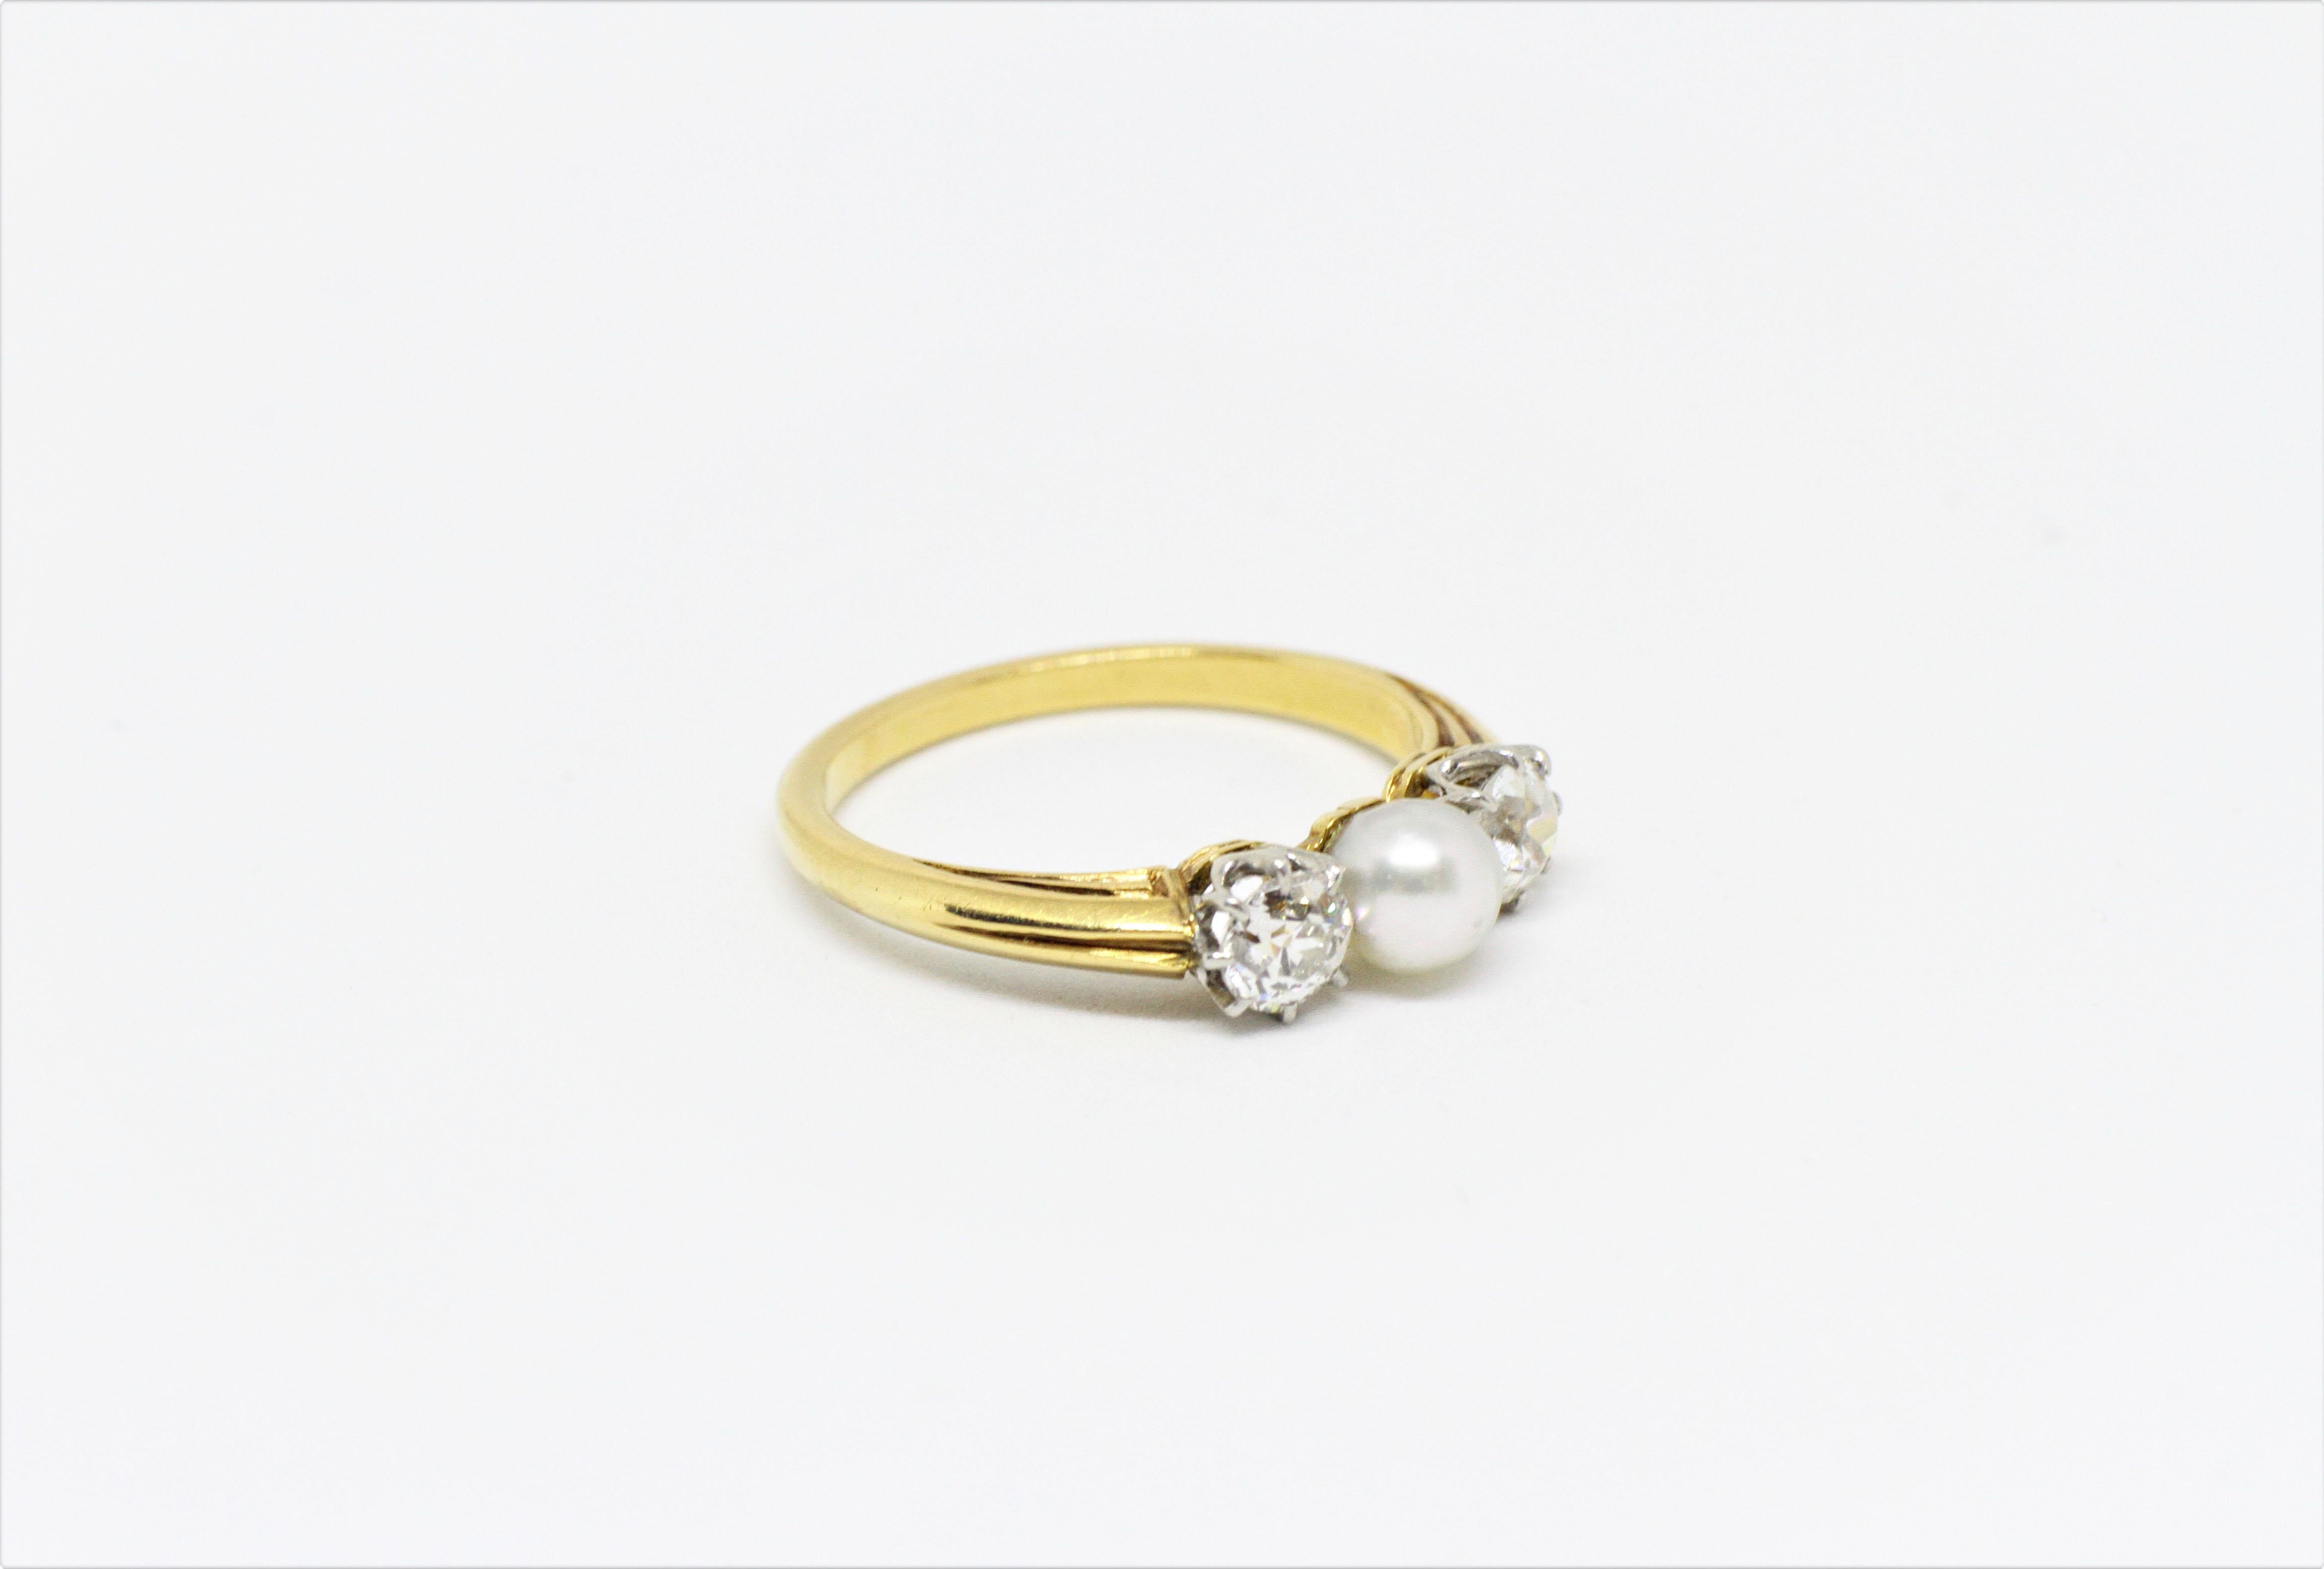 Classic early 1900's three stone ring set with a white natural pearl in the centre of approximately 4.6 millimeters, accompanied by two old cut diamonds of approximately 0.25 carats each on either side. The diamonds are mounted in 7 platinum claws